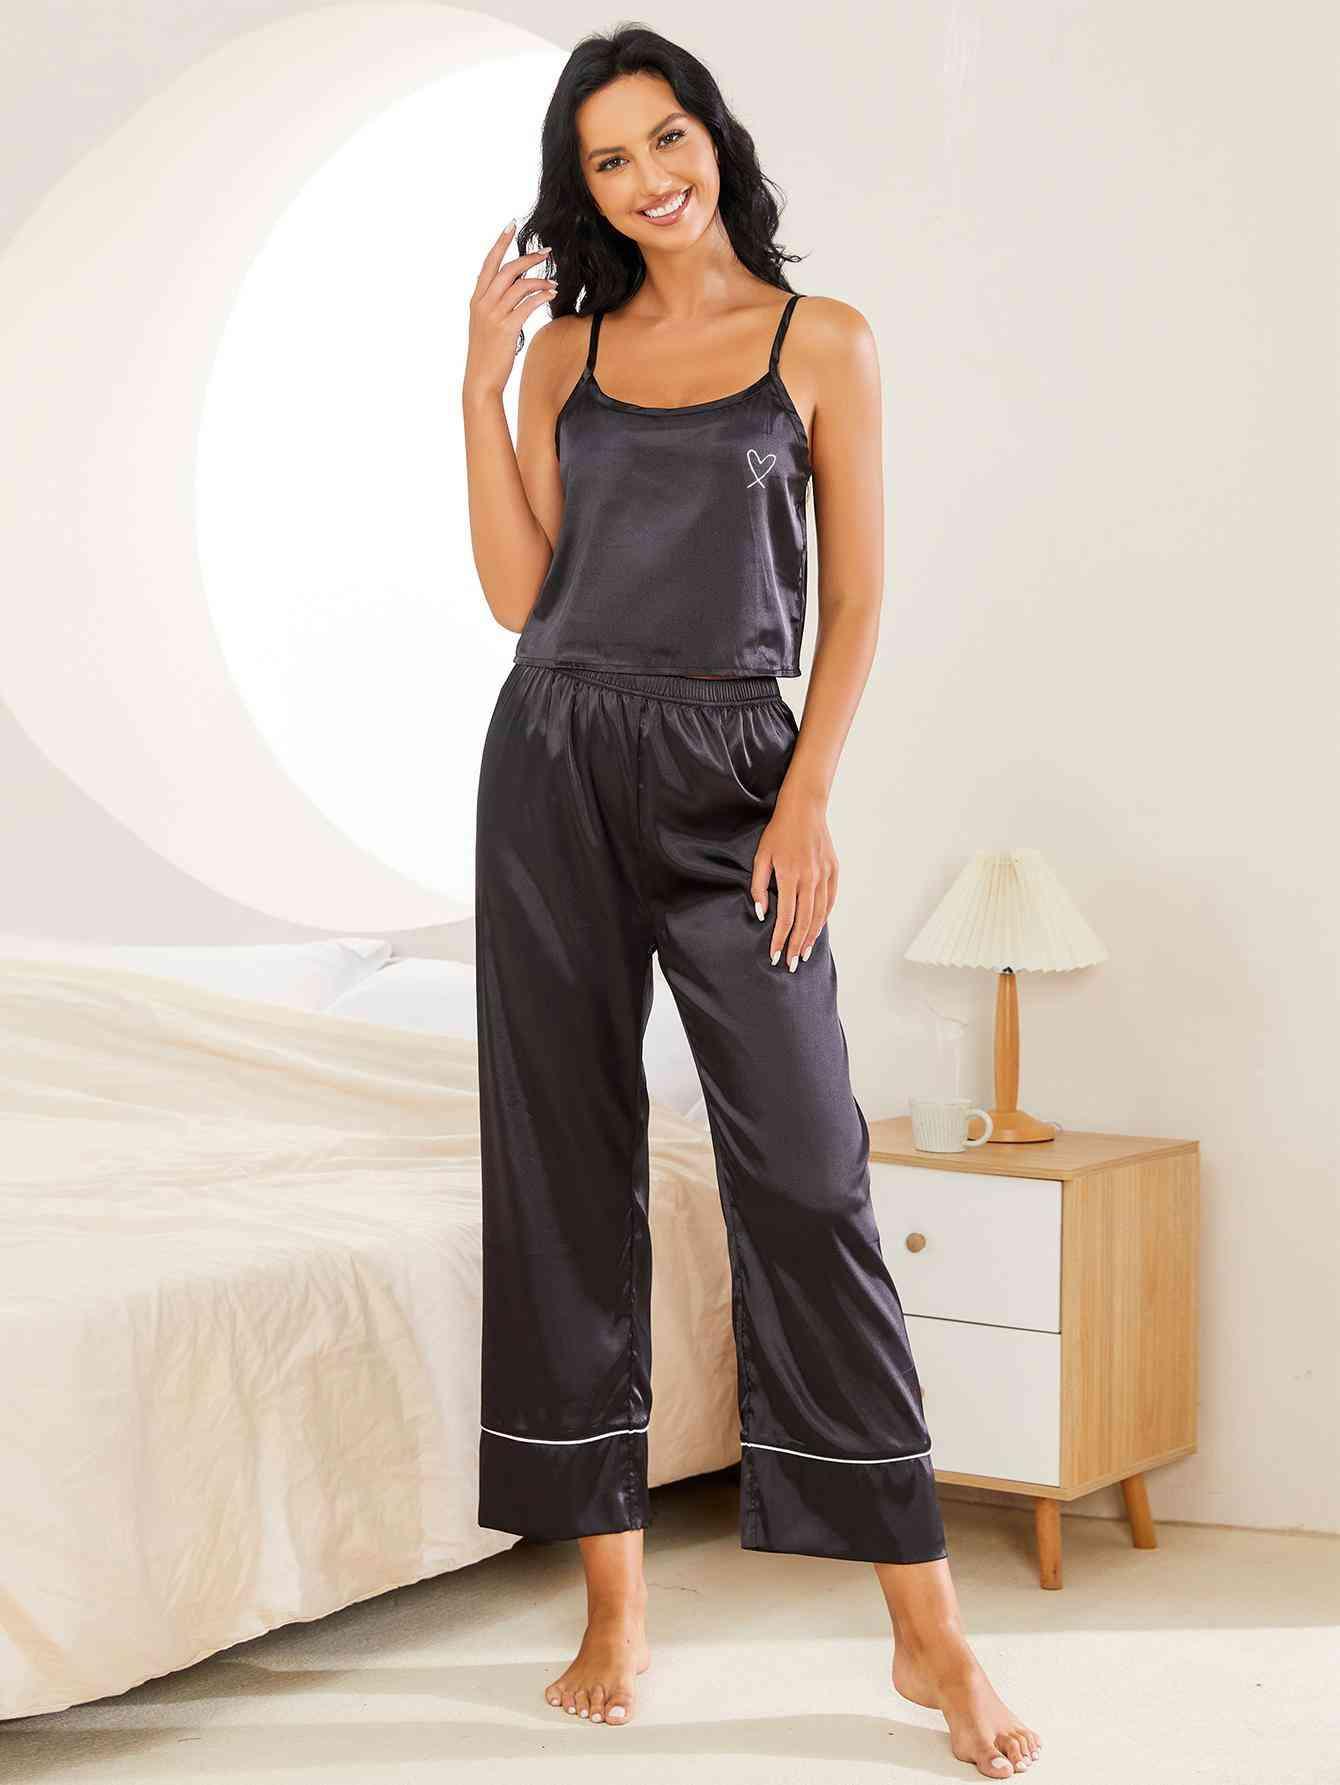 Heart Graphic Cami and Pants Lounge Set - Vesteeto